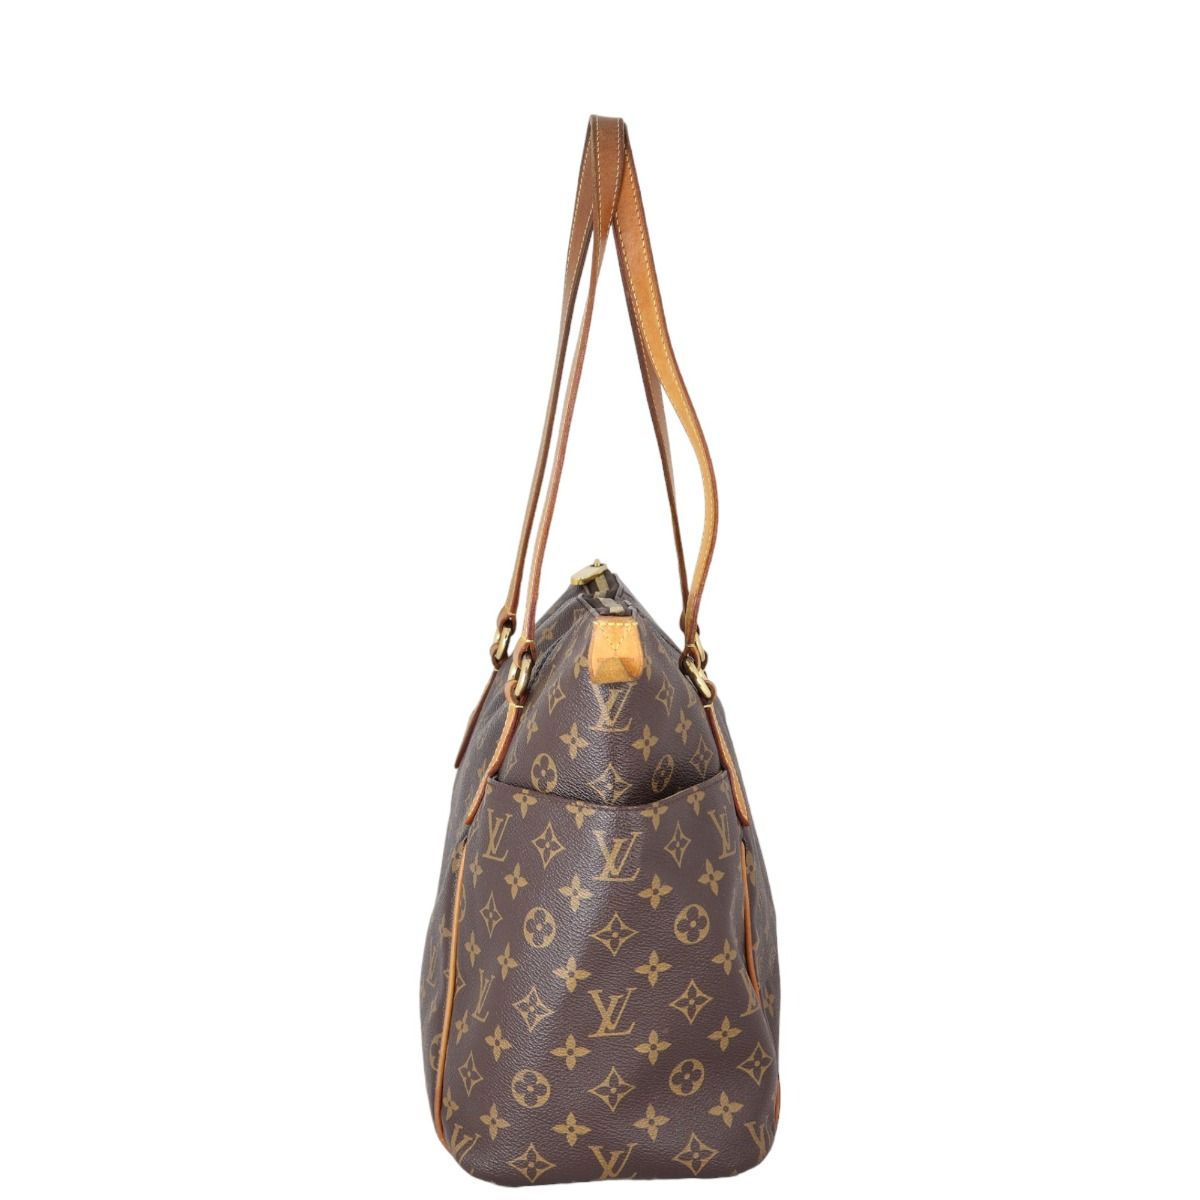 To return or not to return .. so i purchased the LV Totally MM